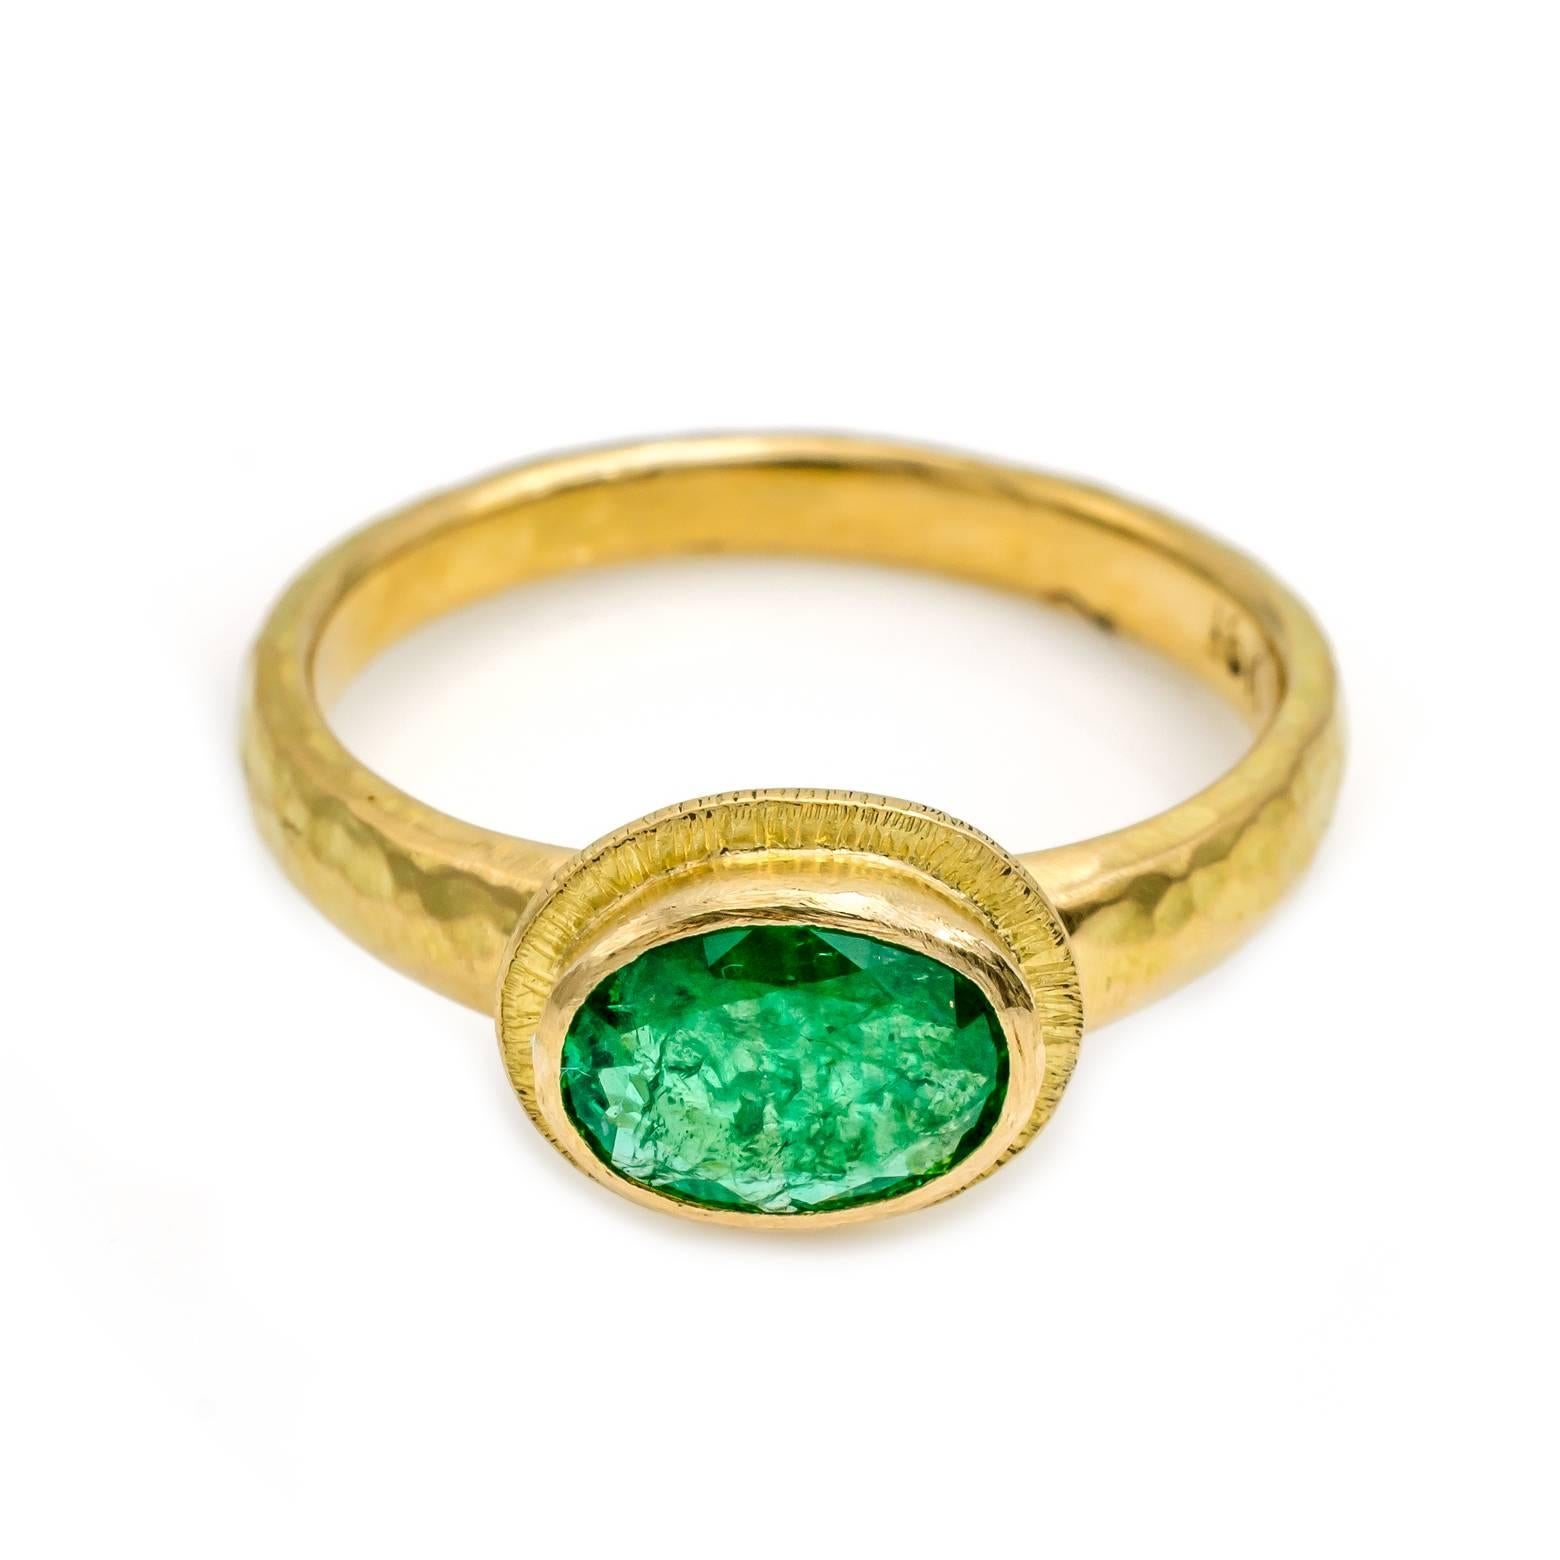 This saturated grassy green emerald ring is set in a textured bezel with lines radiating like the sun and a hammered band that is thick and substantial. Unique, artistic, and glamorous this ring is sure to be mesmerize your emerald desires and